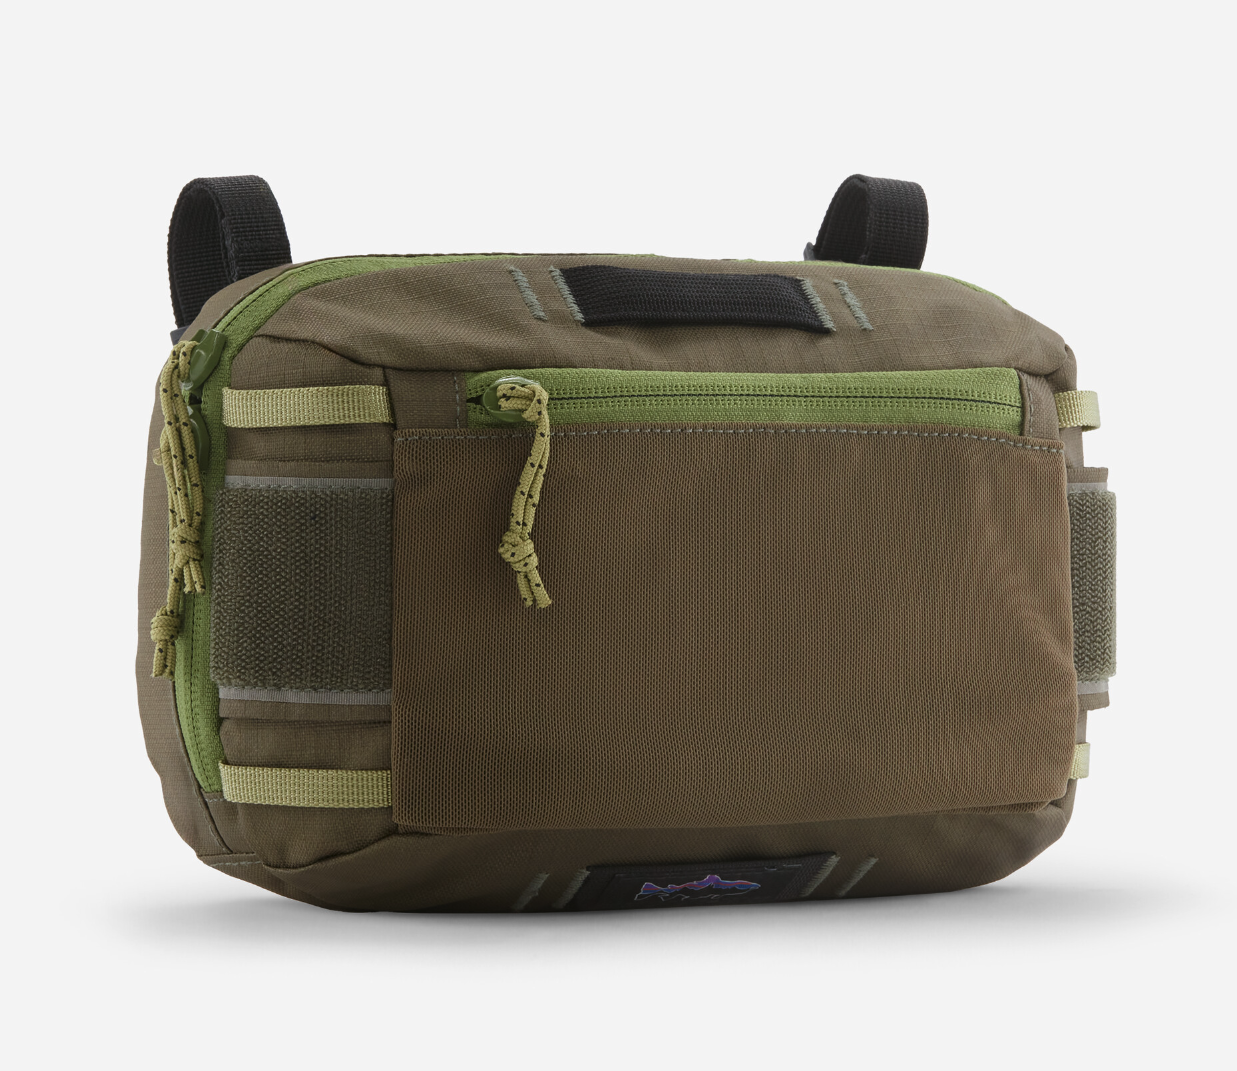 Order Patagonia Wader Work Station online at the best prices.